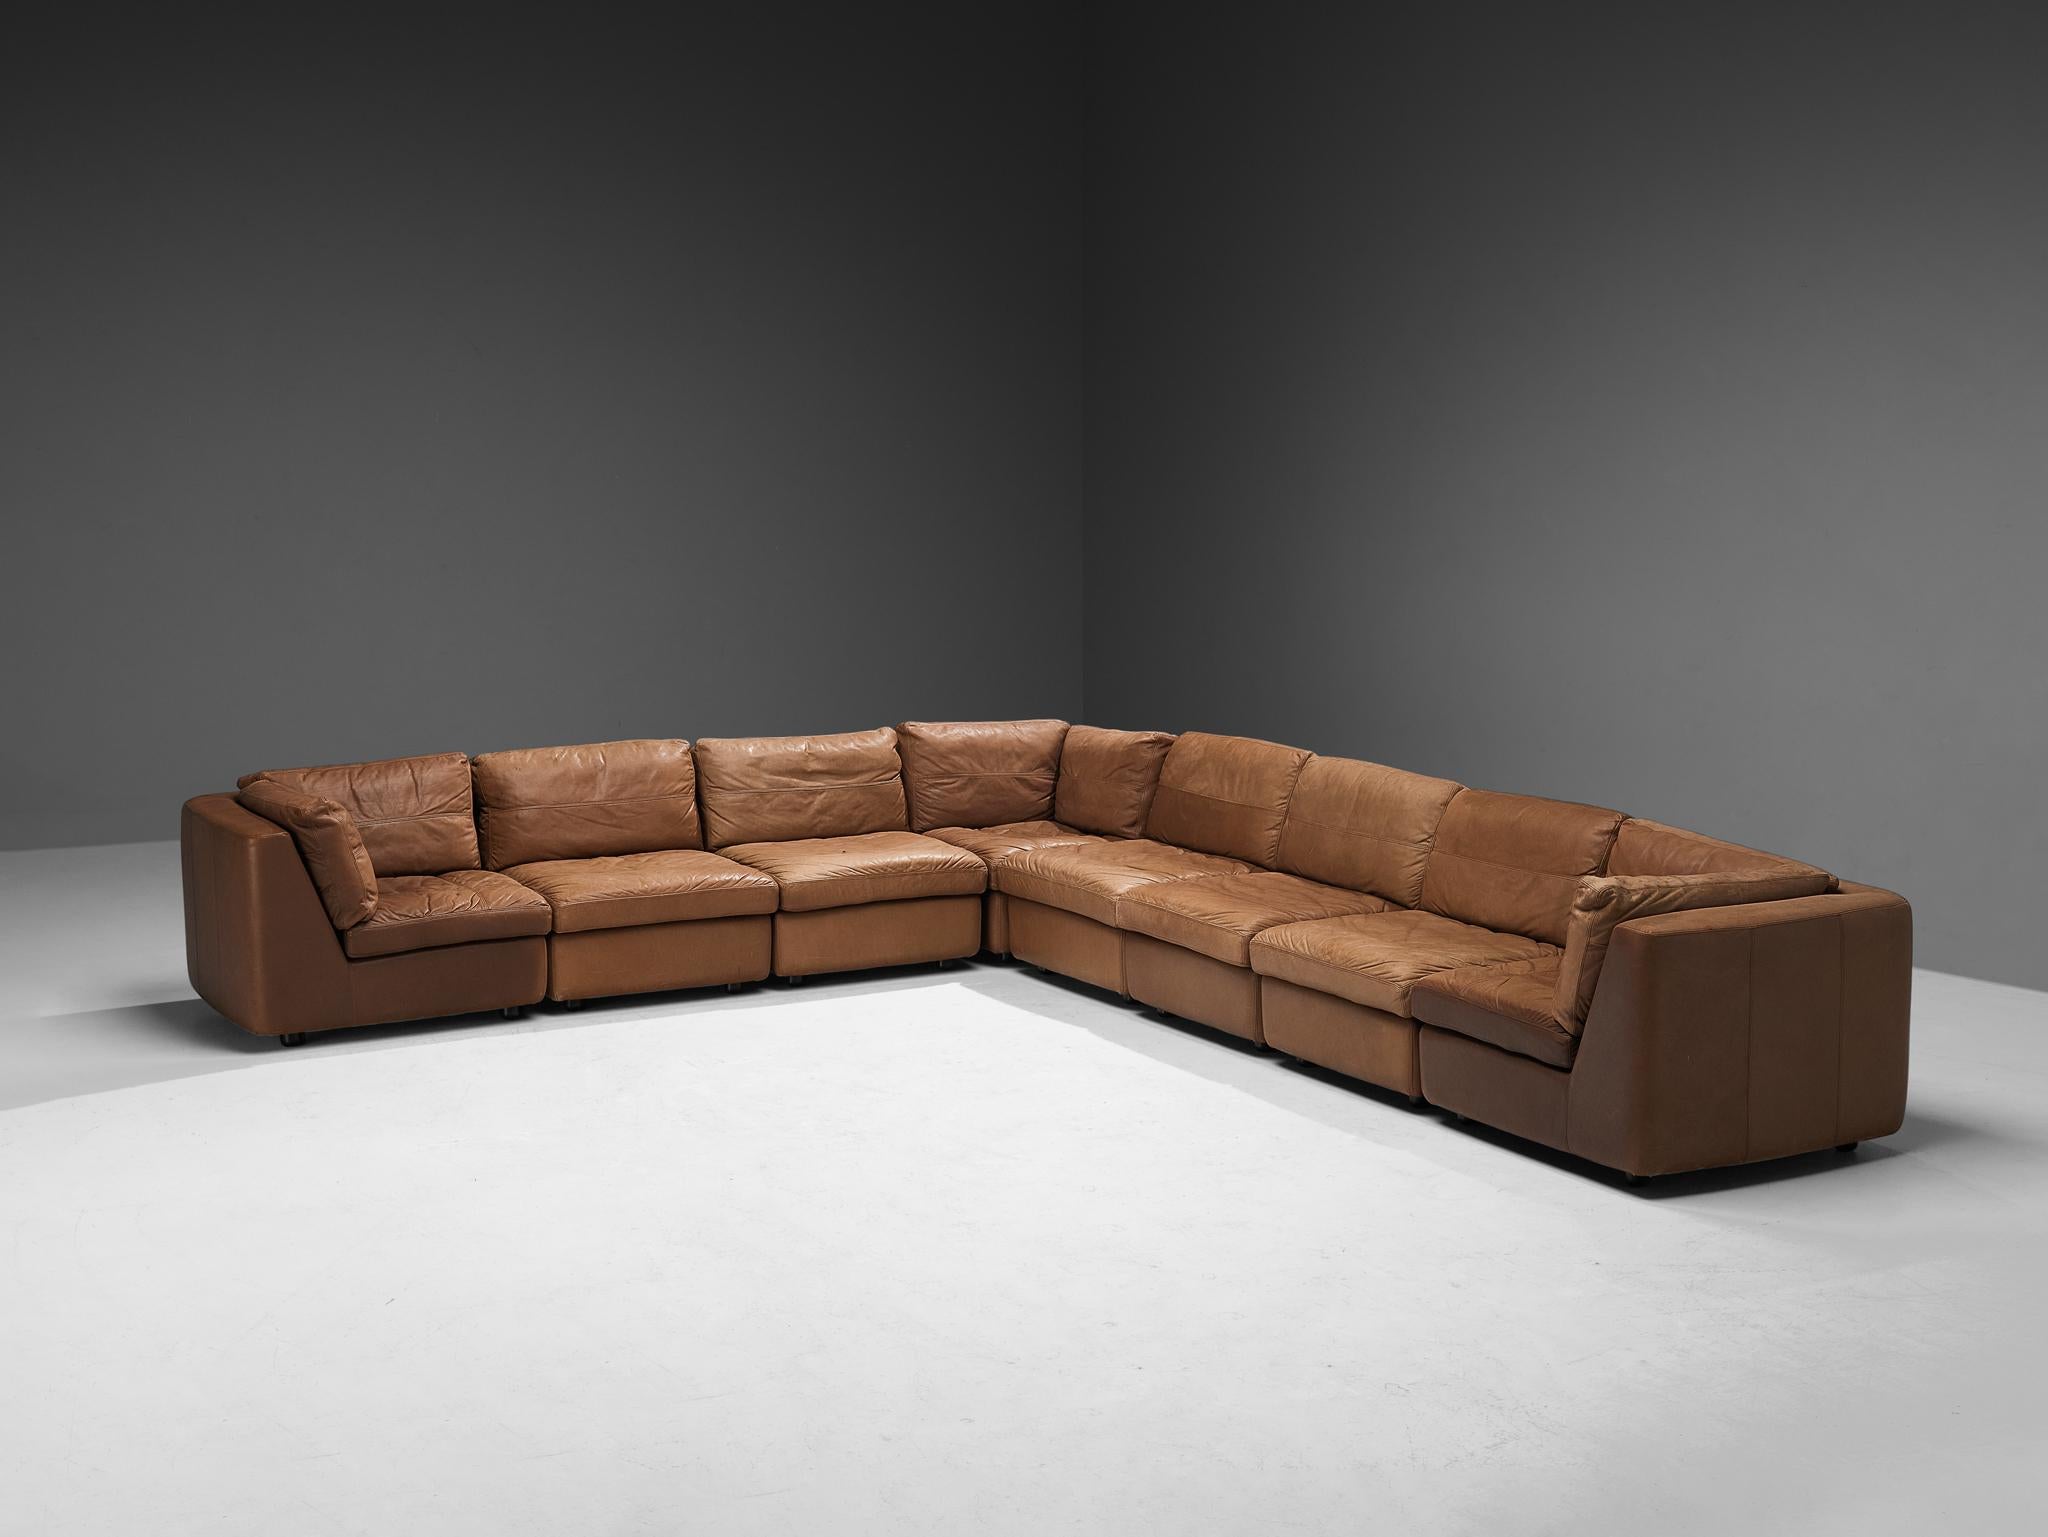 German Mid-Century Sectional Sofa in Patinated Cognac Leather